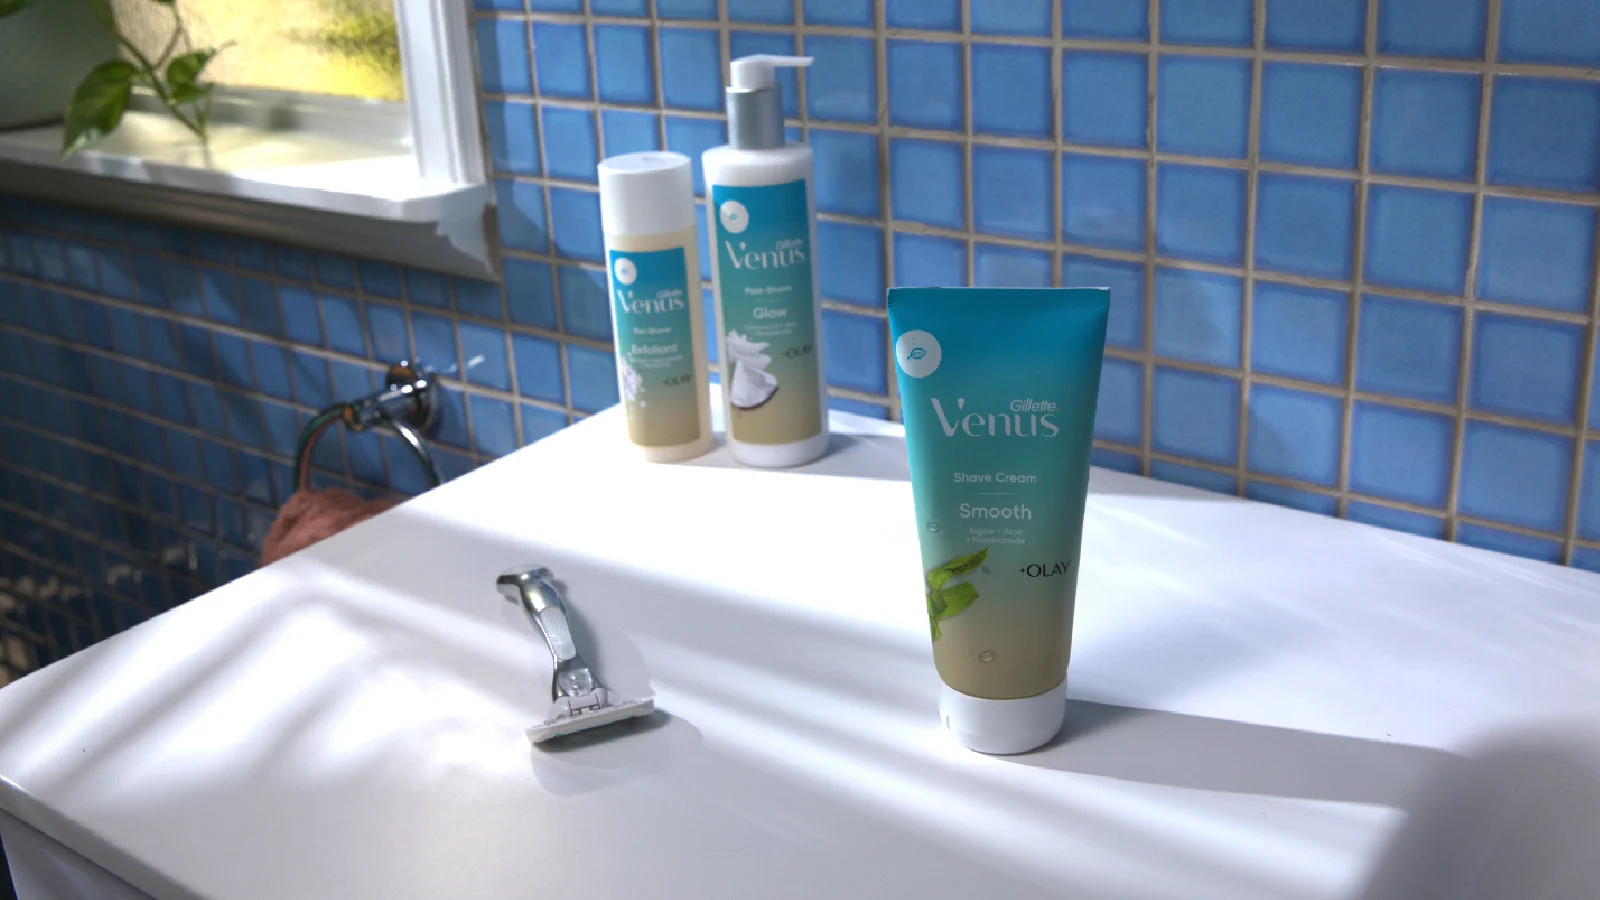 Venus Facial care products in the bathroom